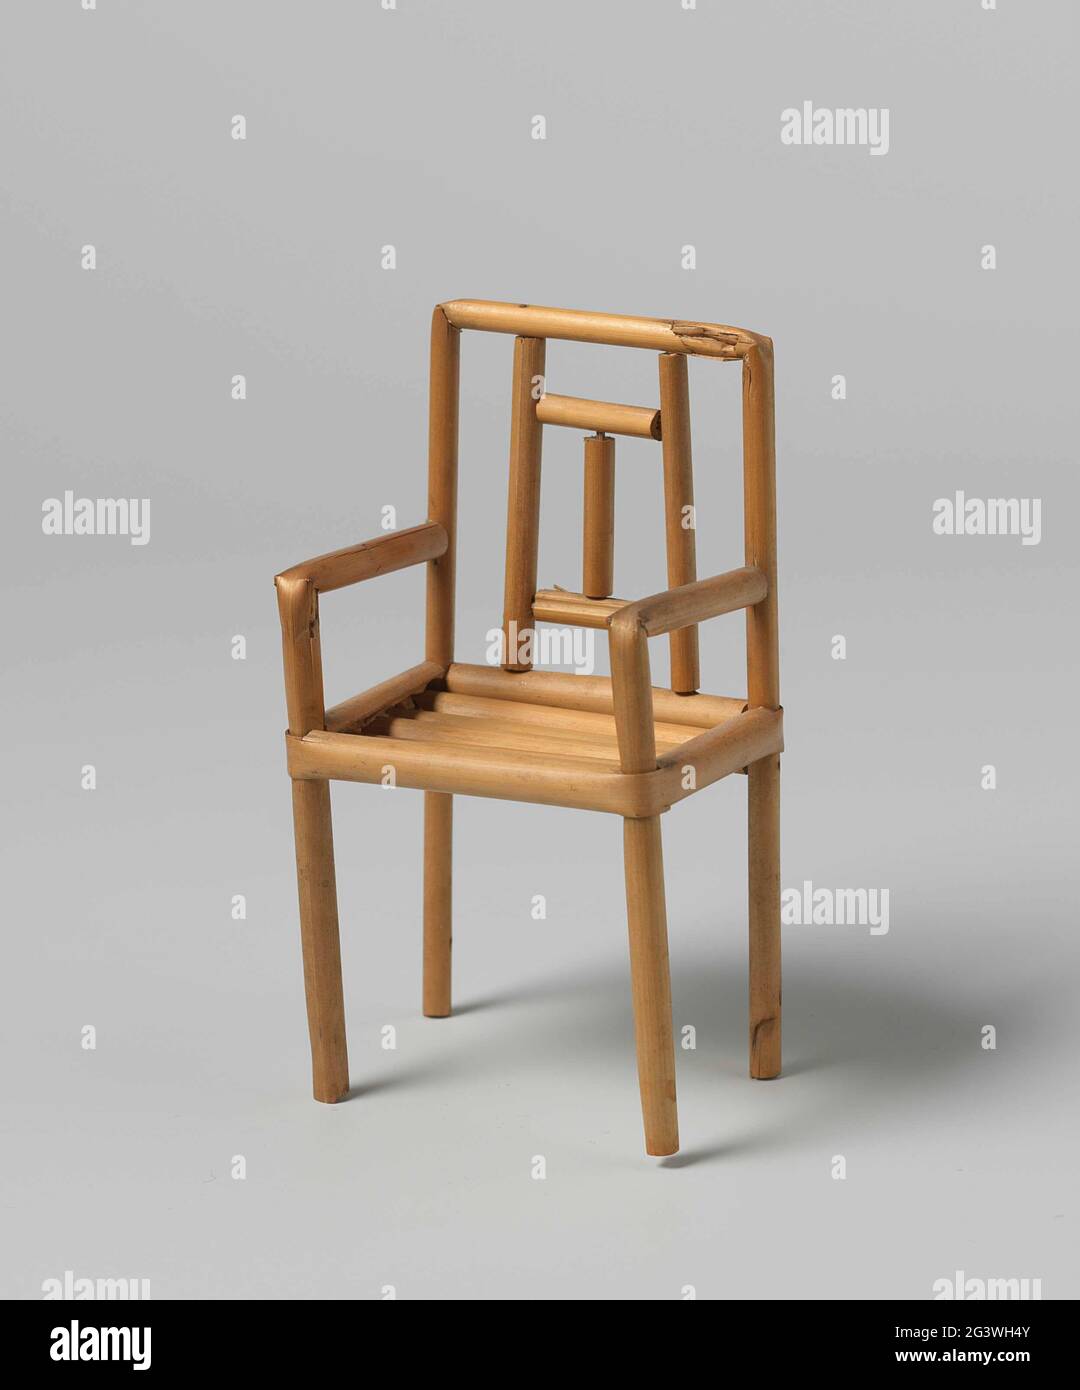 Chair of braid, with geometric motifs. Chair made from curved, and on wooden pennettes racing rod reeds. The backrest with geometric motifs. The legs interconnected with cross rules. The seat is made of 5 half reed bars confirmed in the width. Stock Photo